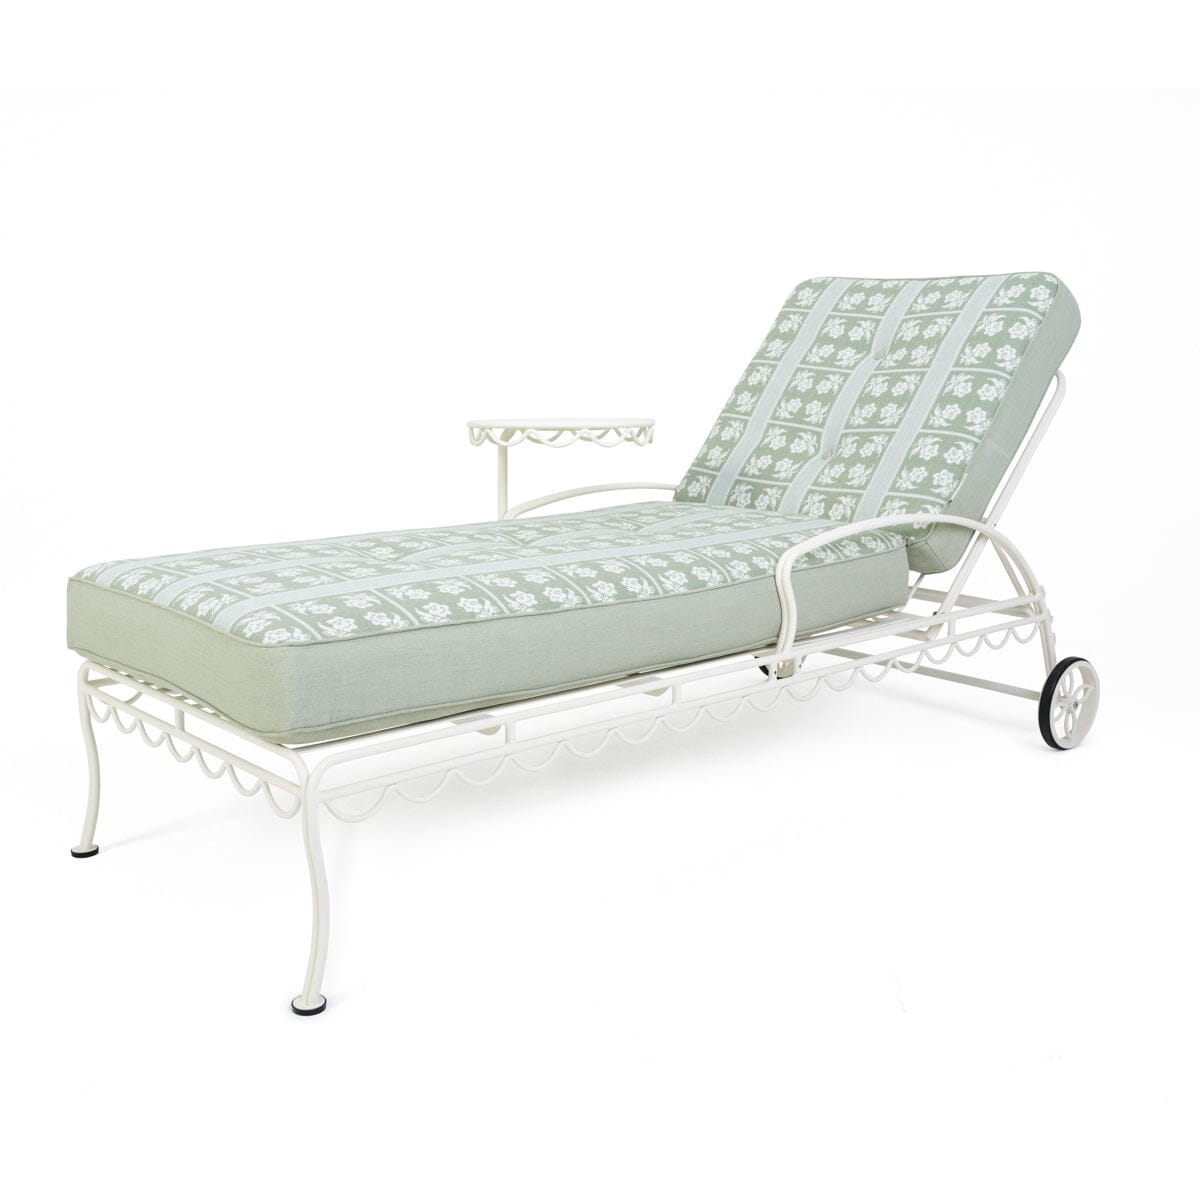 Studio image of sun lounger with cushion